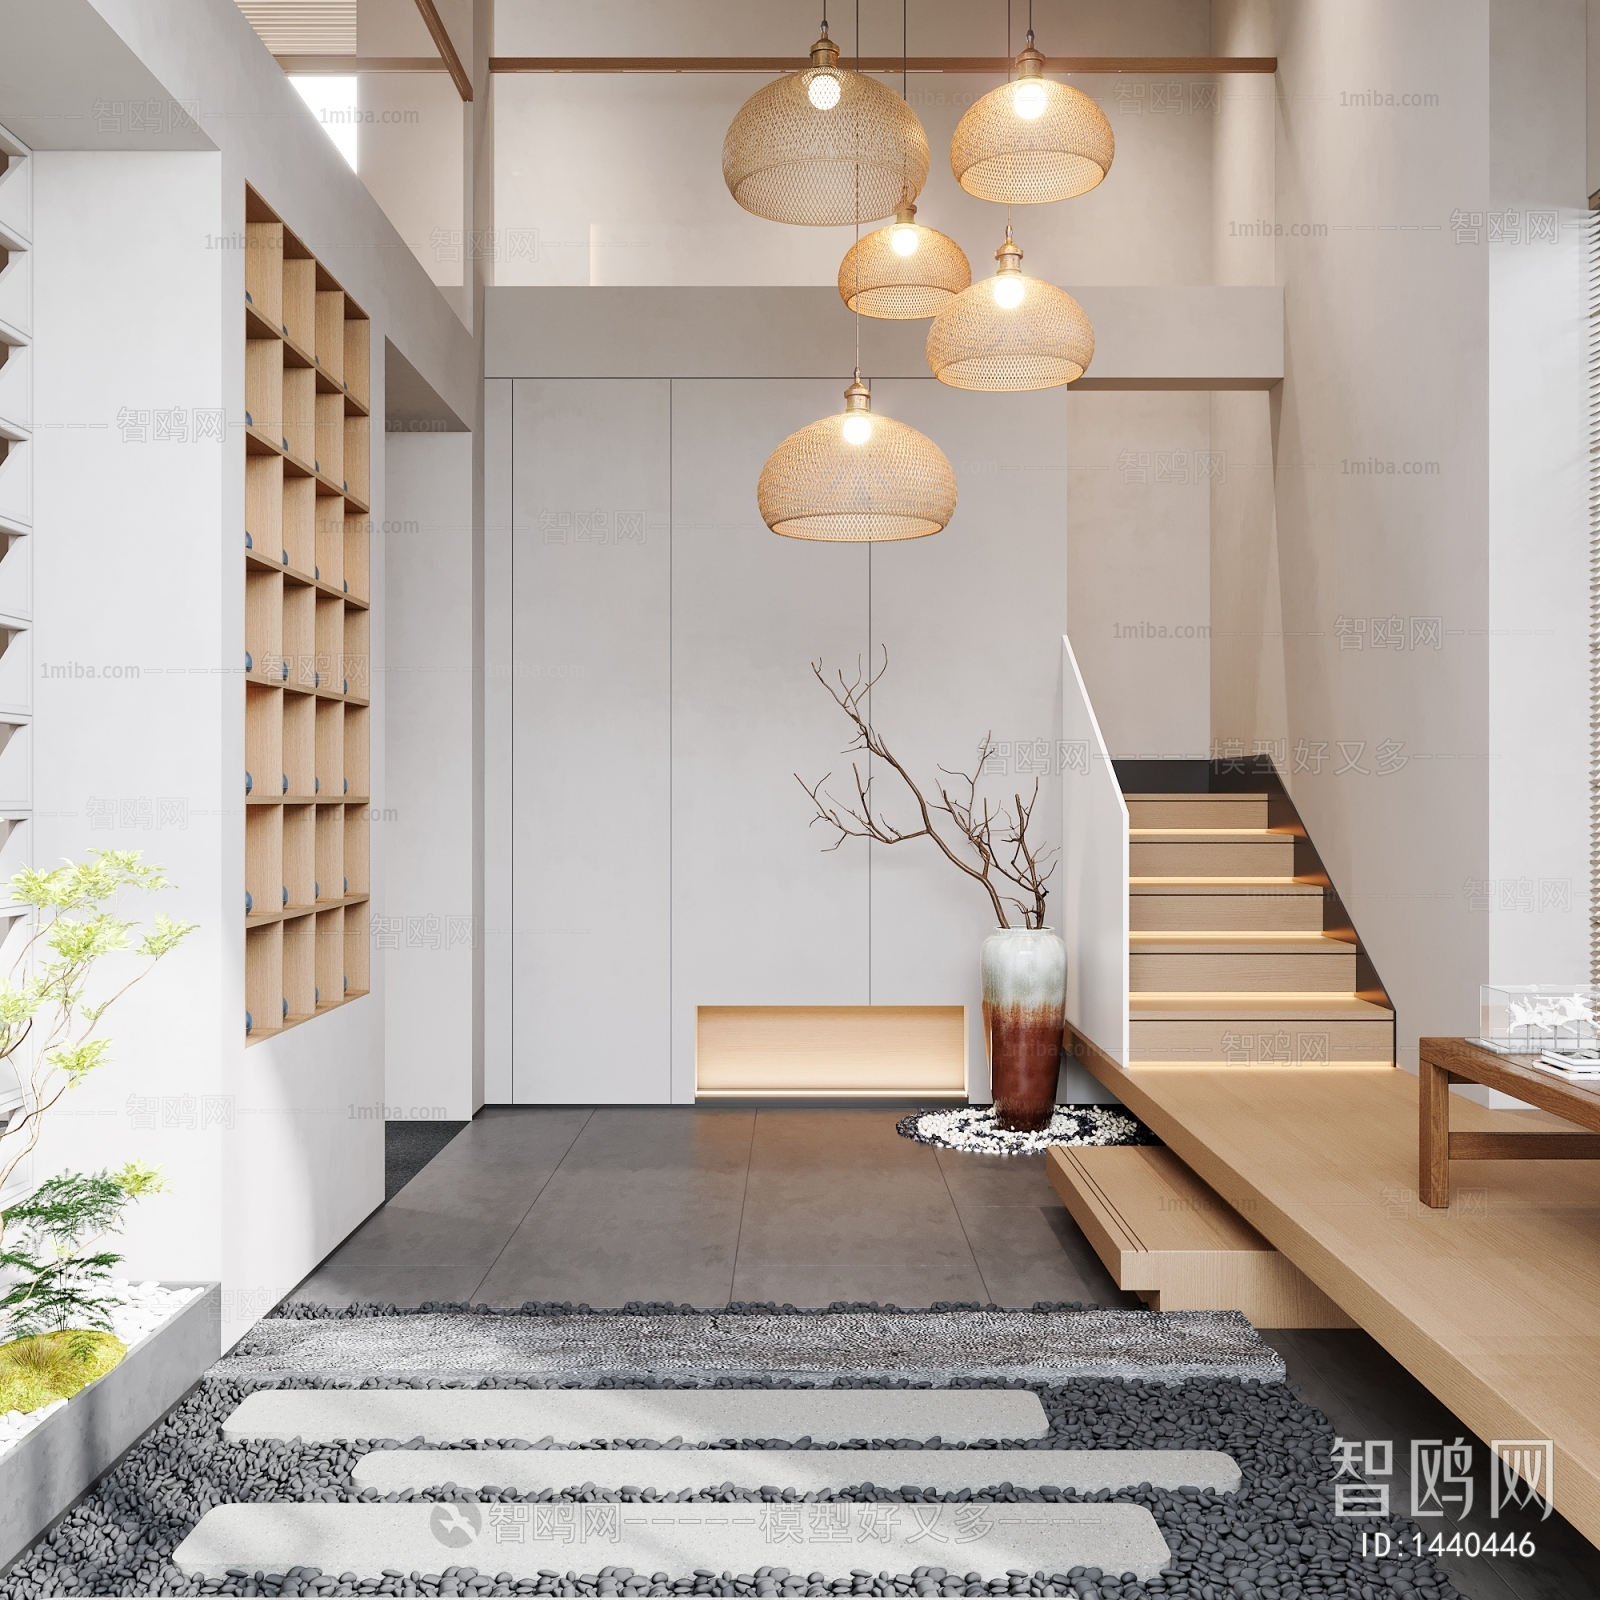 Japanese Style Stairwell